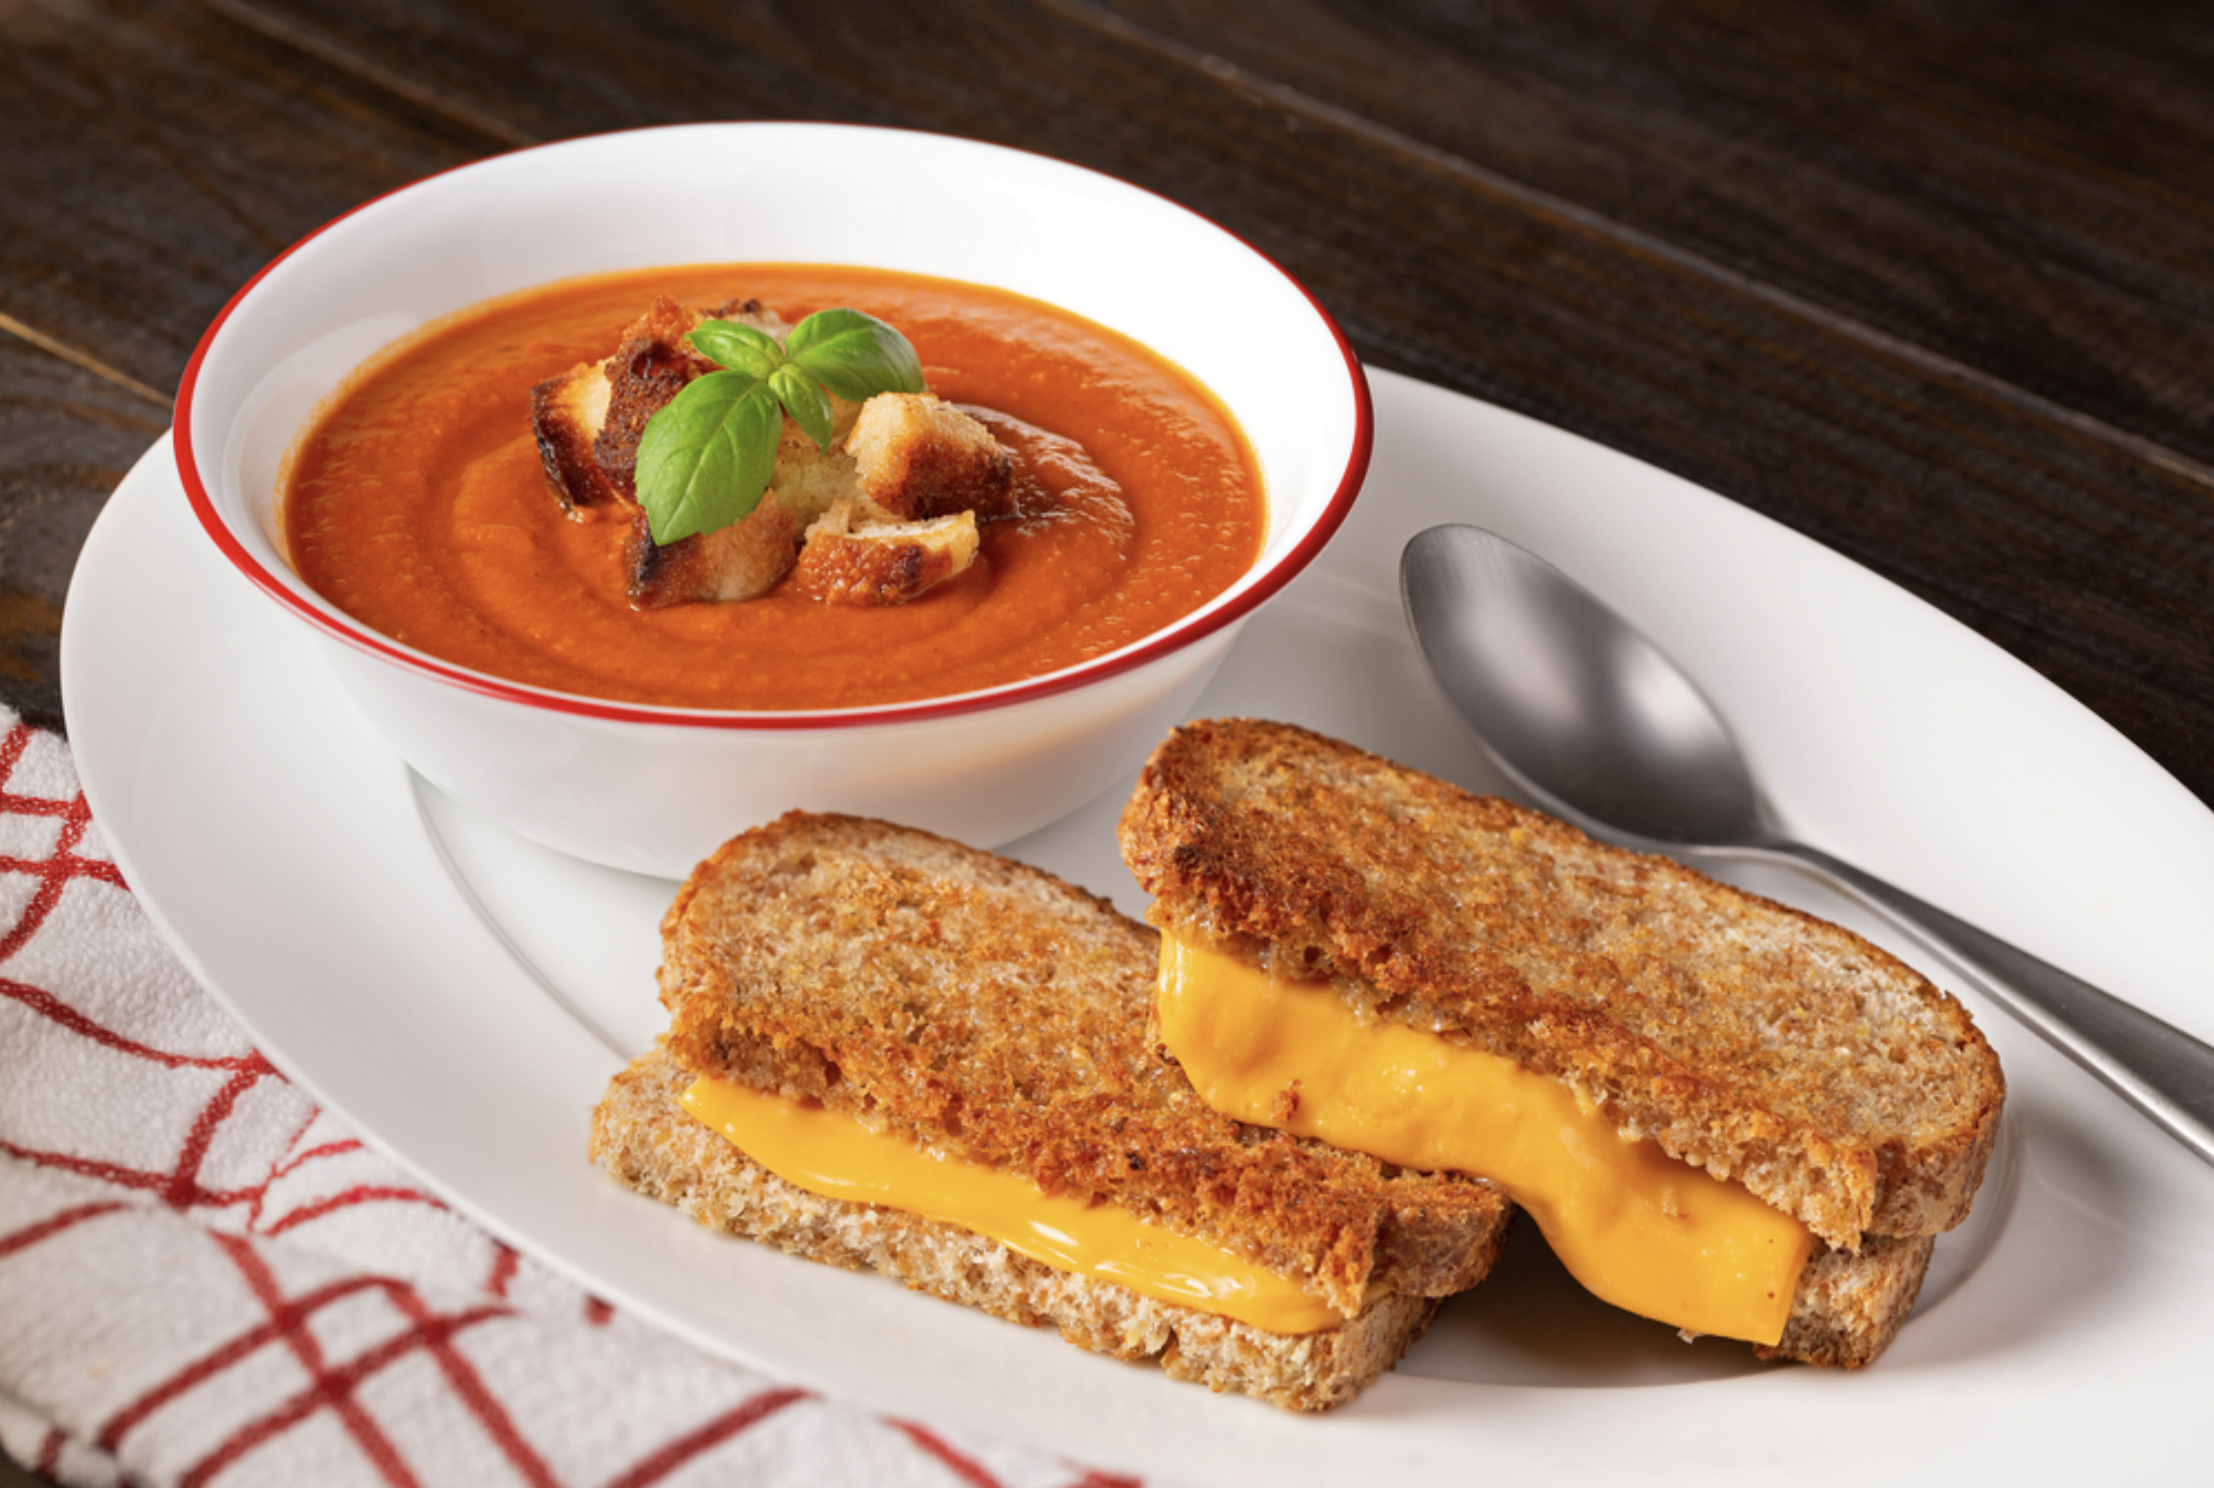 Grilled cheese sandwich and tomato soup is the classic childhood combo